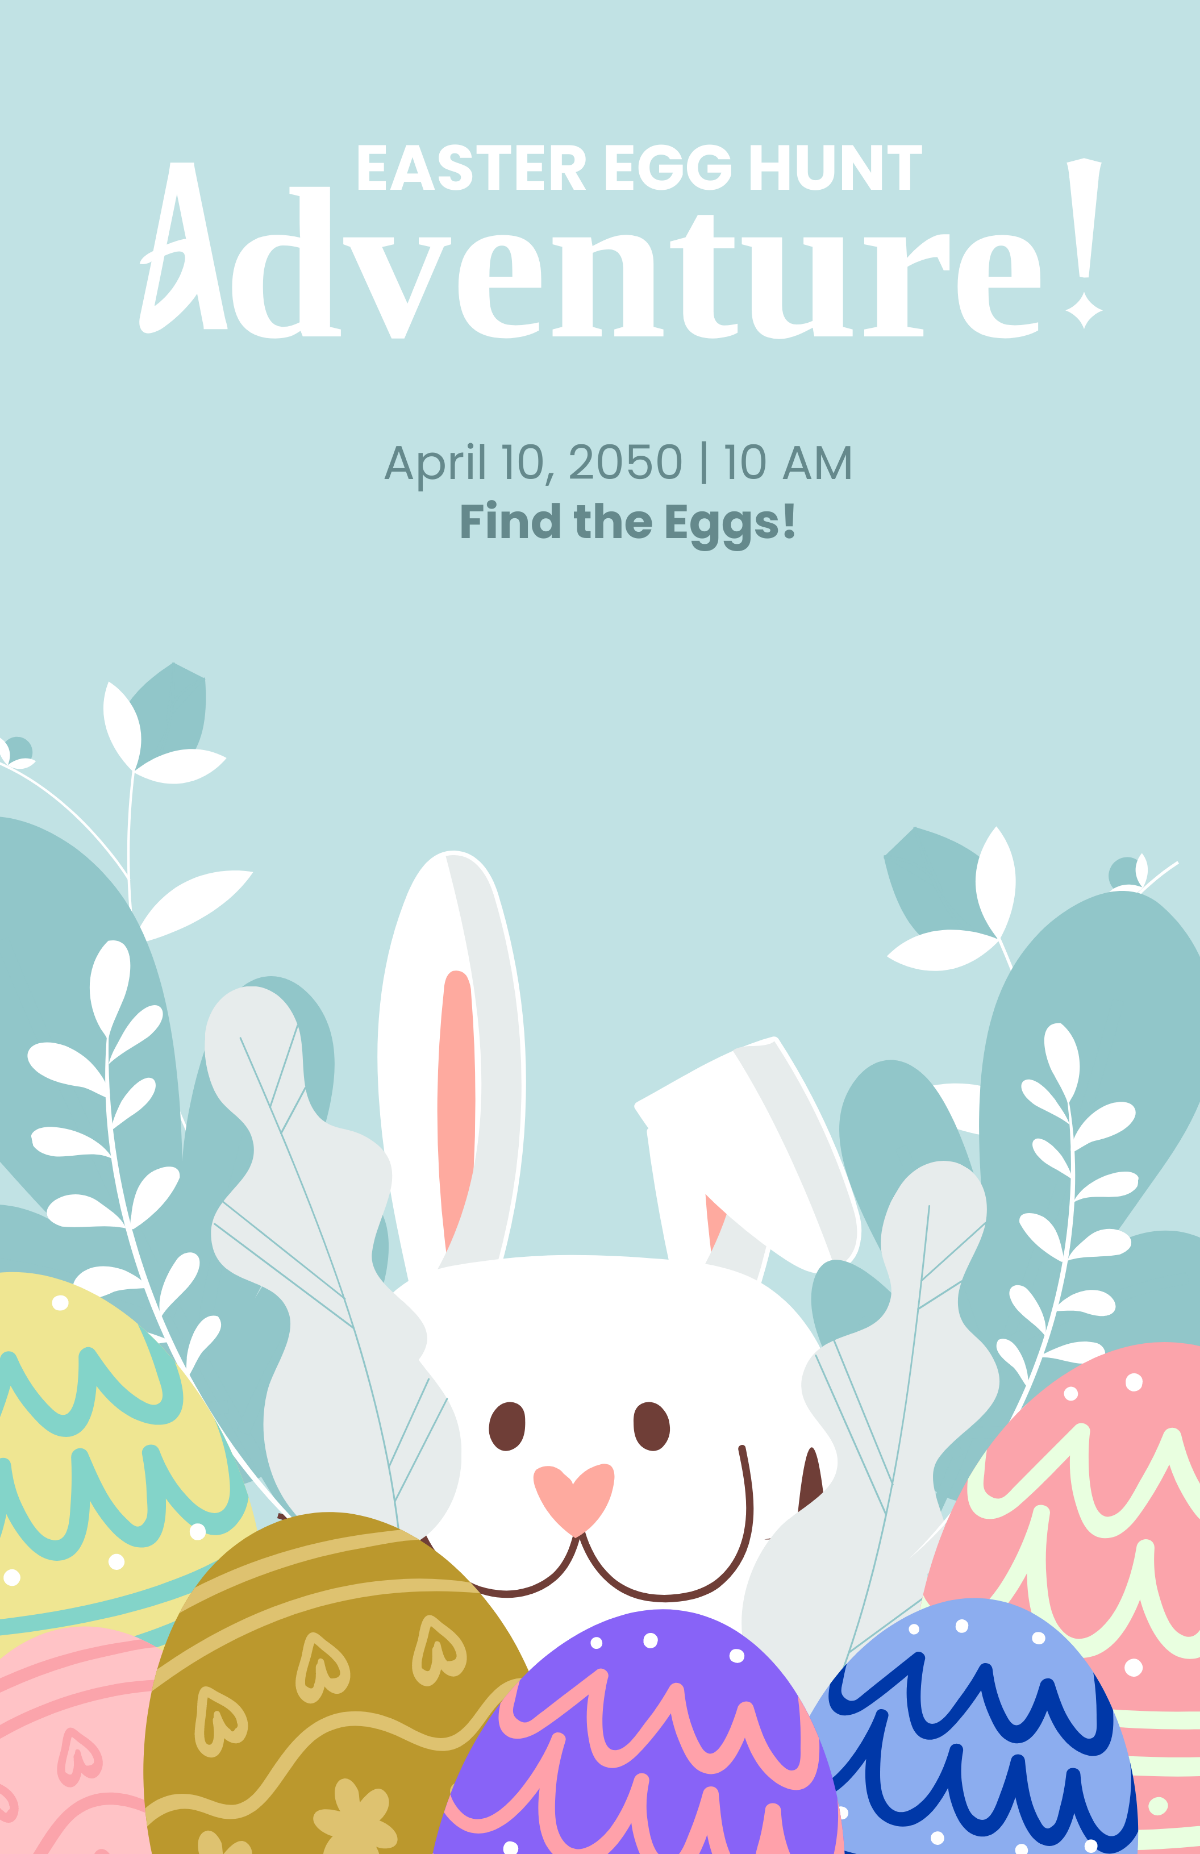 Free Easter Egg Hunt Event Template